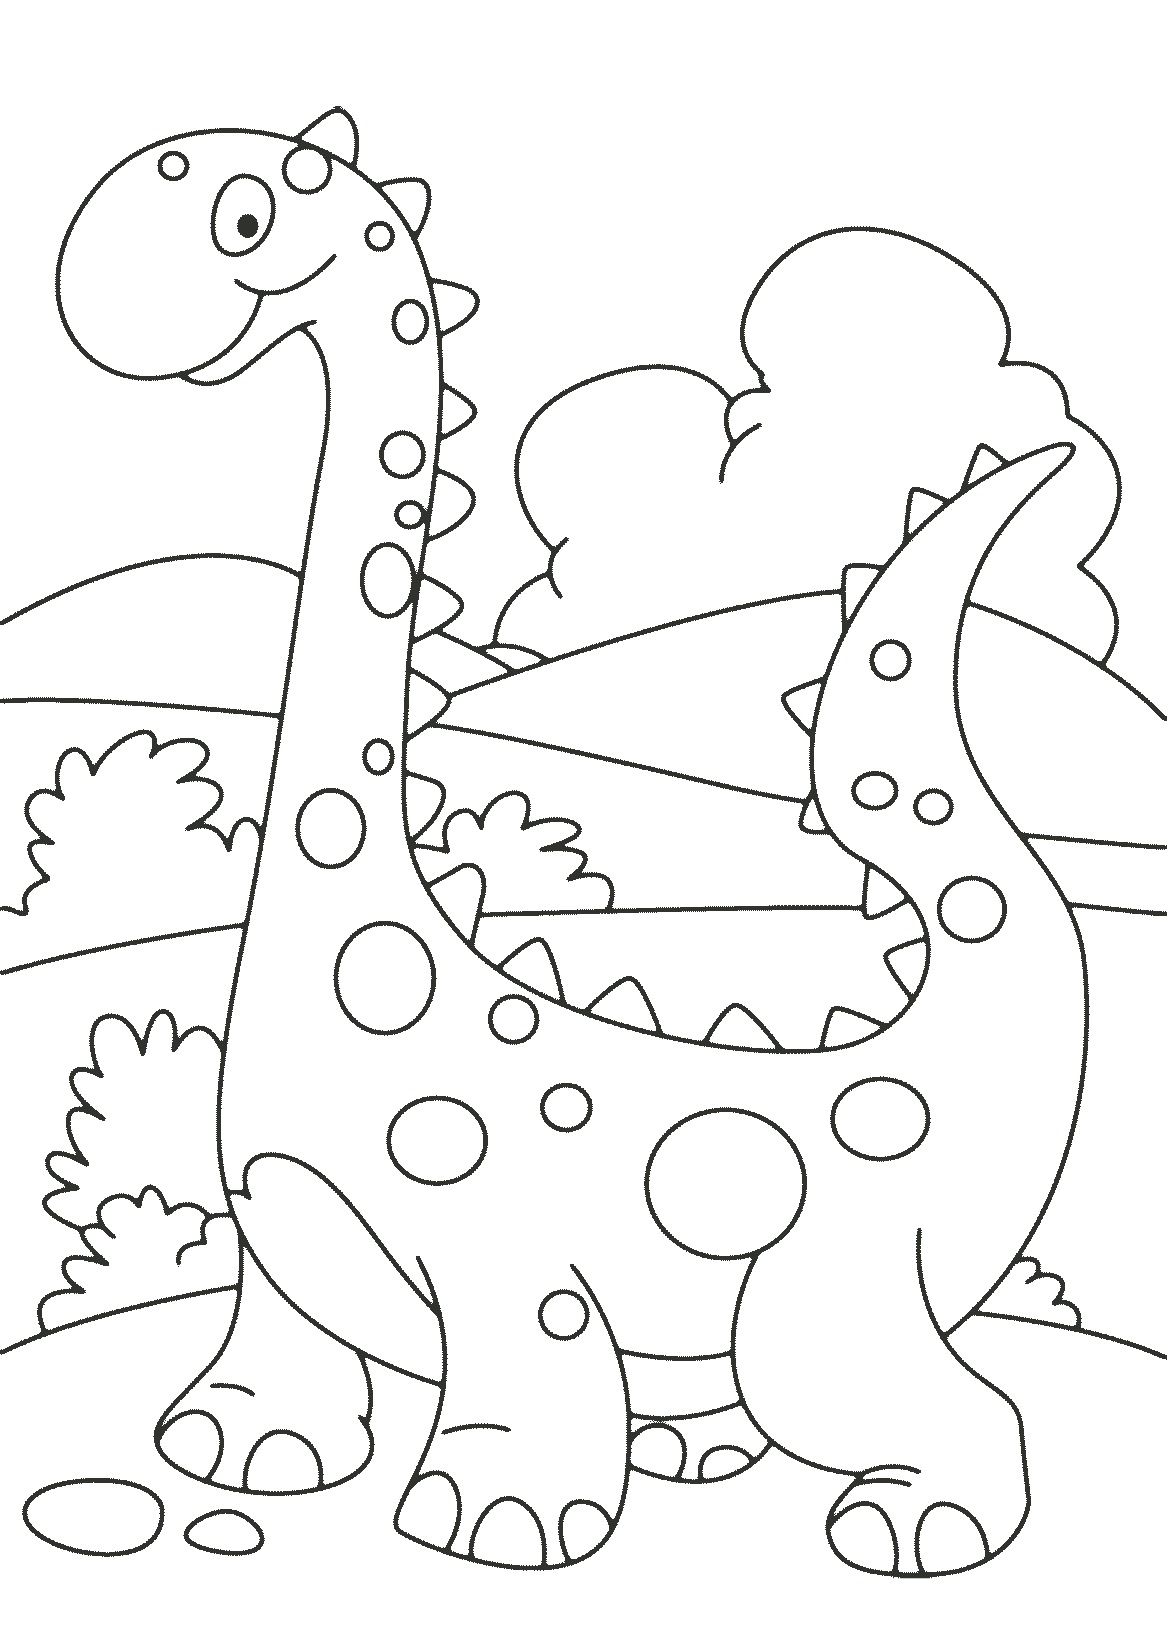 Easy Preschool and kindergarten Dinosaur Coloring Page Cute and Lovely Cartoon Dino